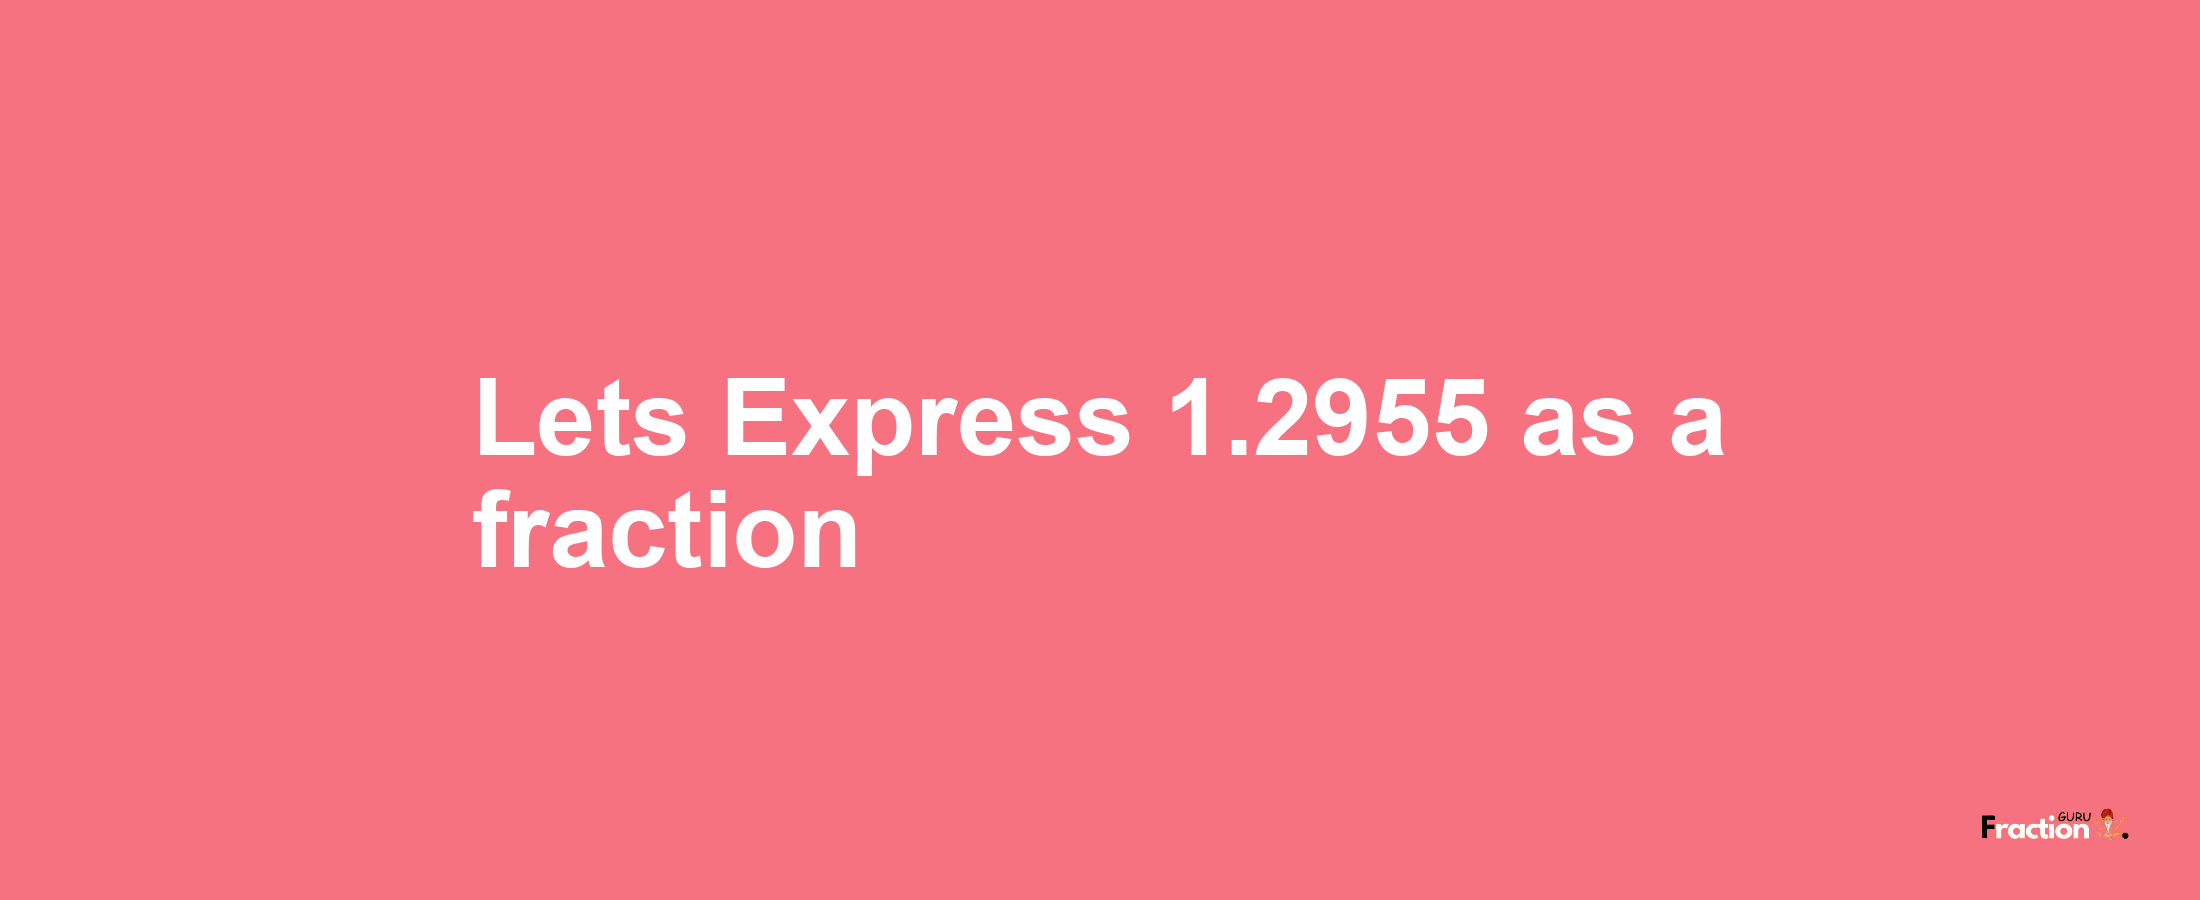 Lets Express 1.2955 as afraction